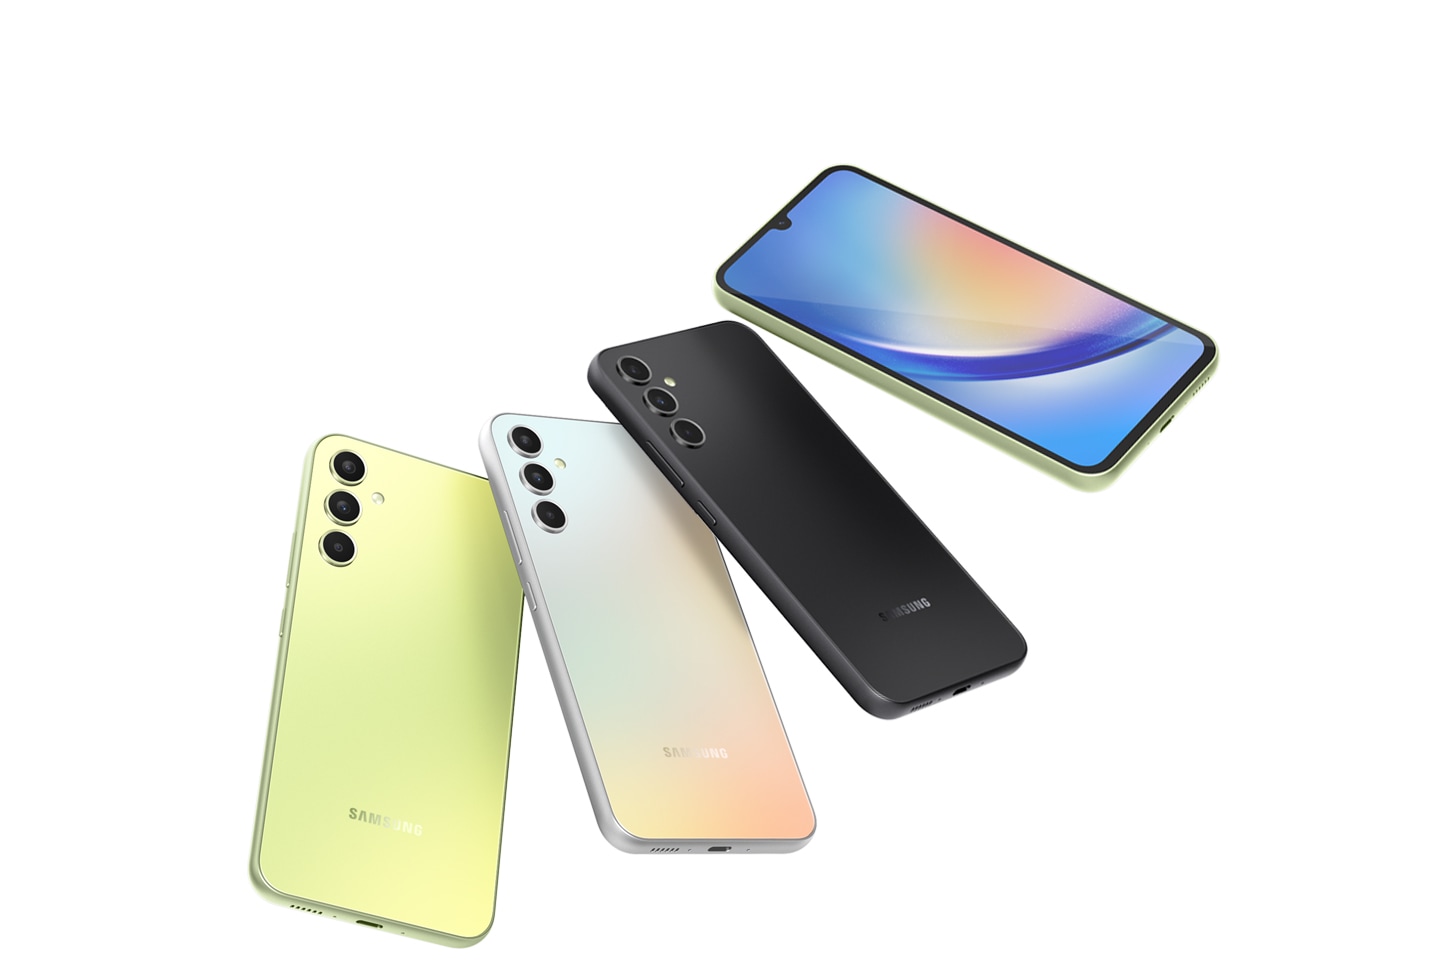 Five Galaxy A34 5G devices are fanned out. Four devices in Awesome Lime, Awesome Silver, Awesome Violet and Awesome Graphite show their backsides while the top most device, in Awesome Lime, shows the screen.